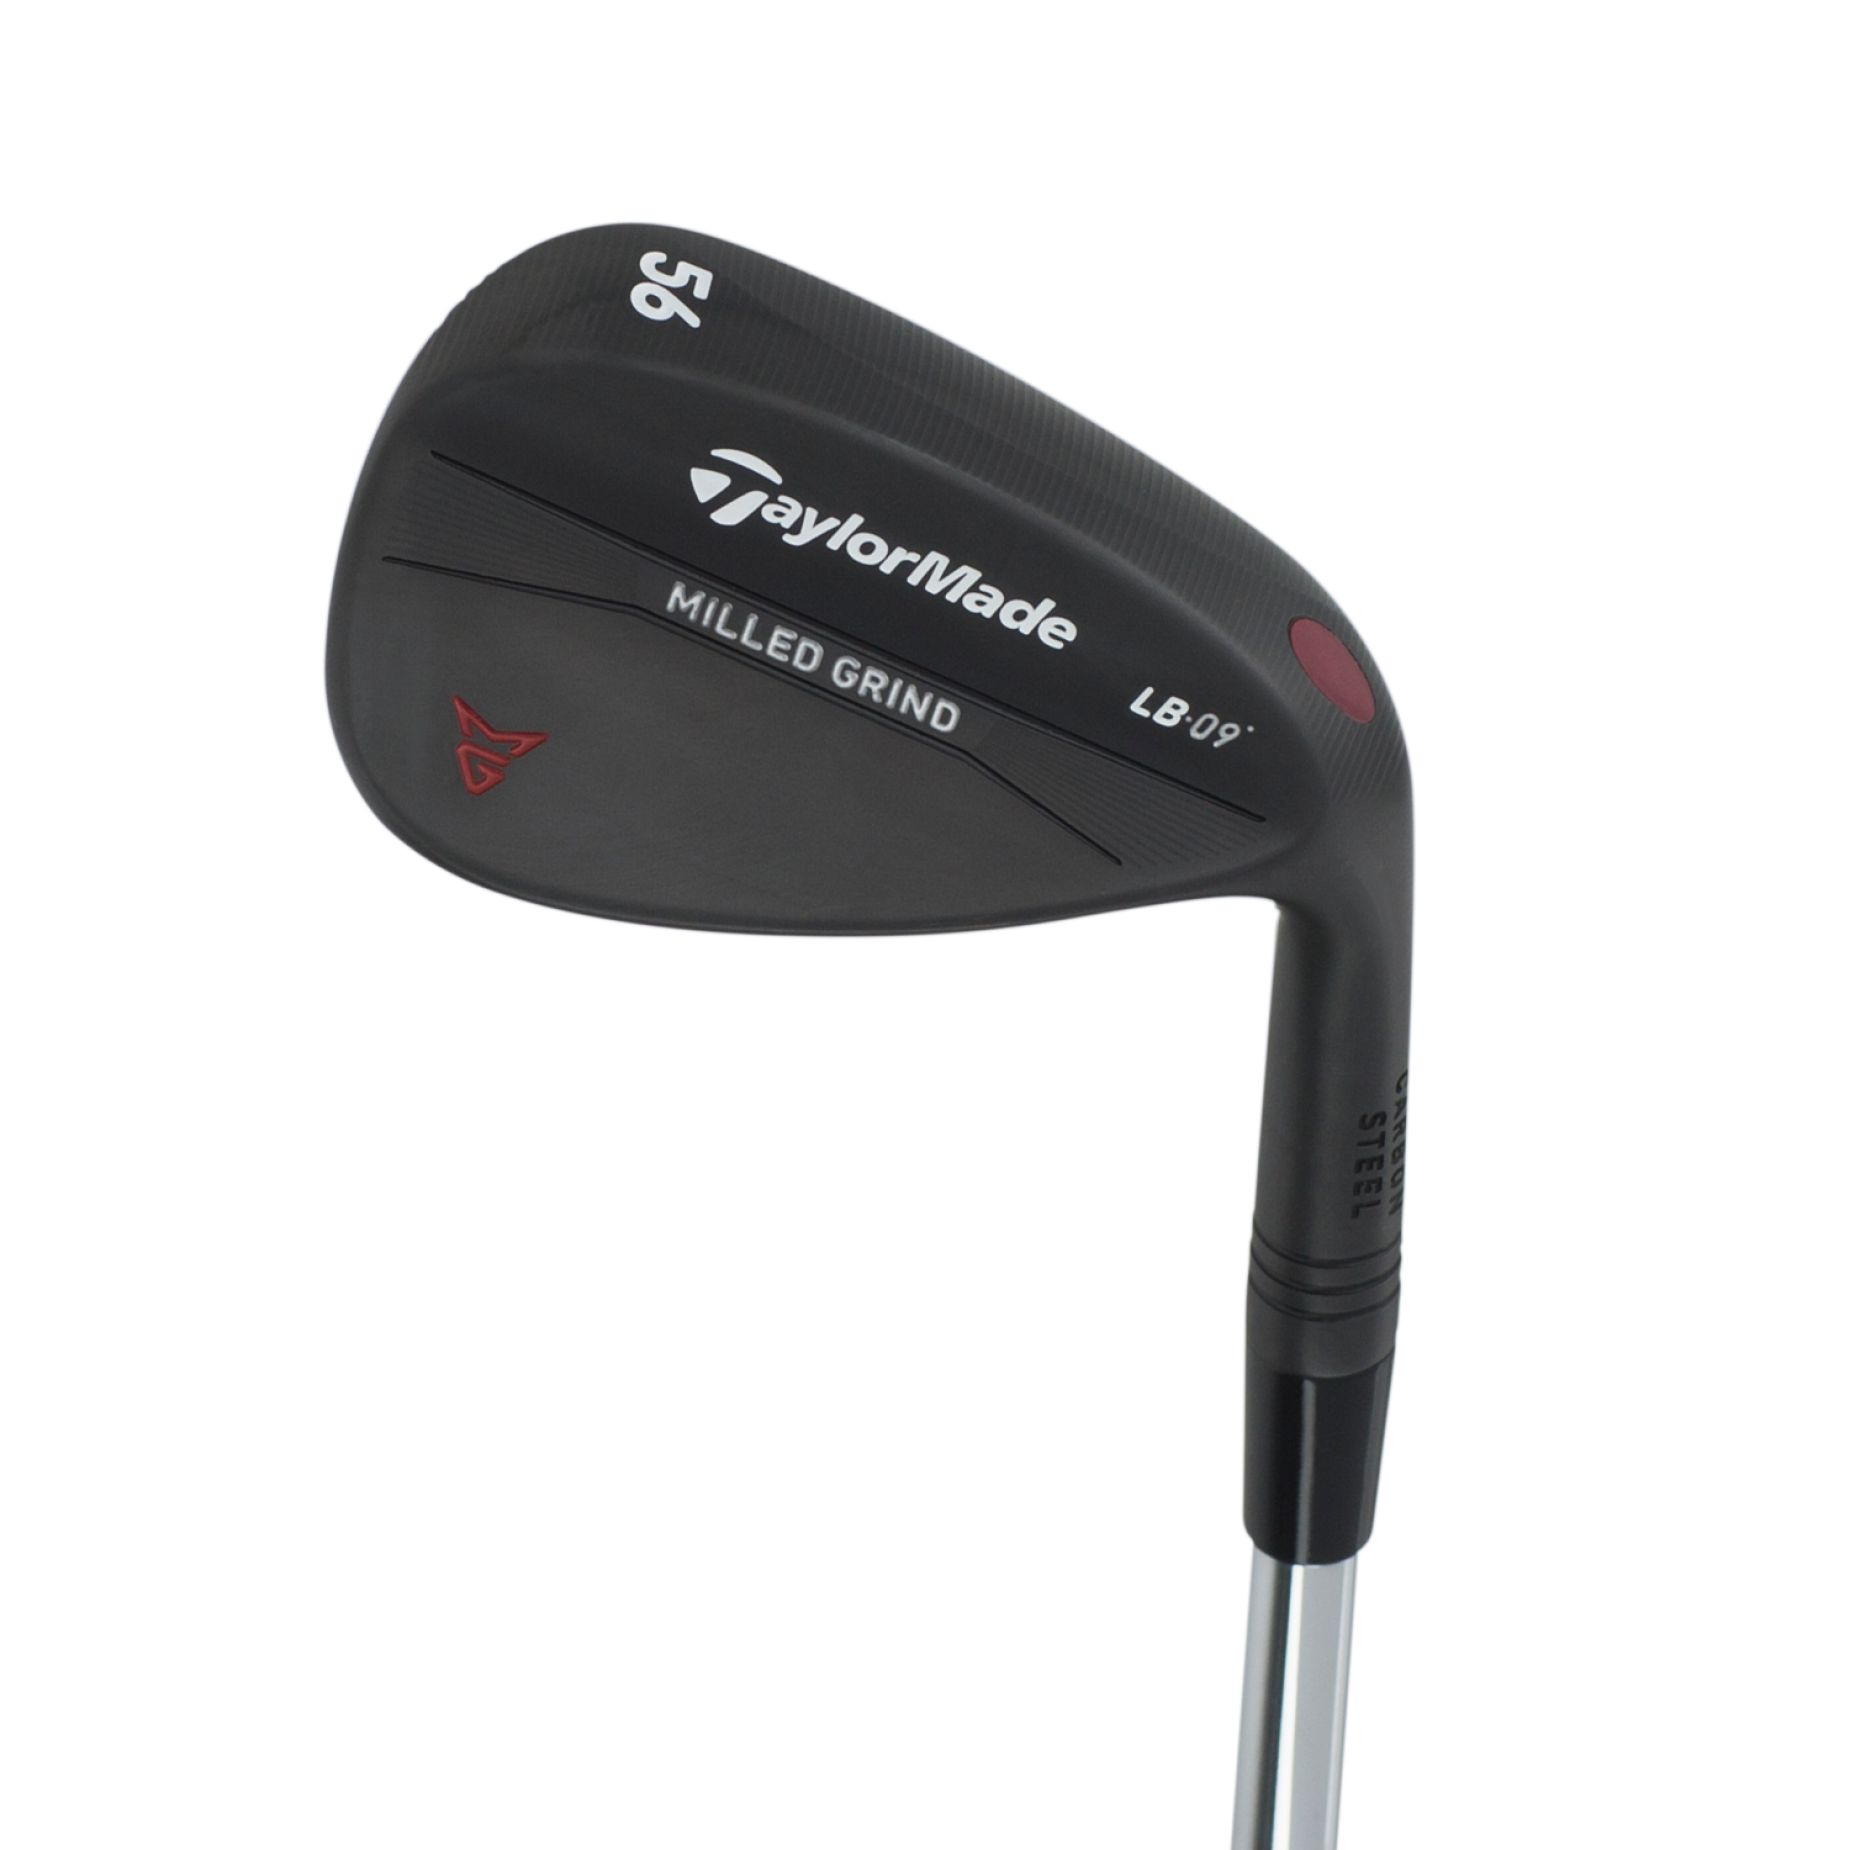 0318-Wedge-Beauty-TaylorMade-Milled-Grind.png